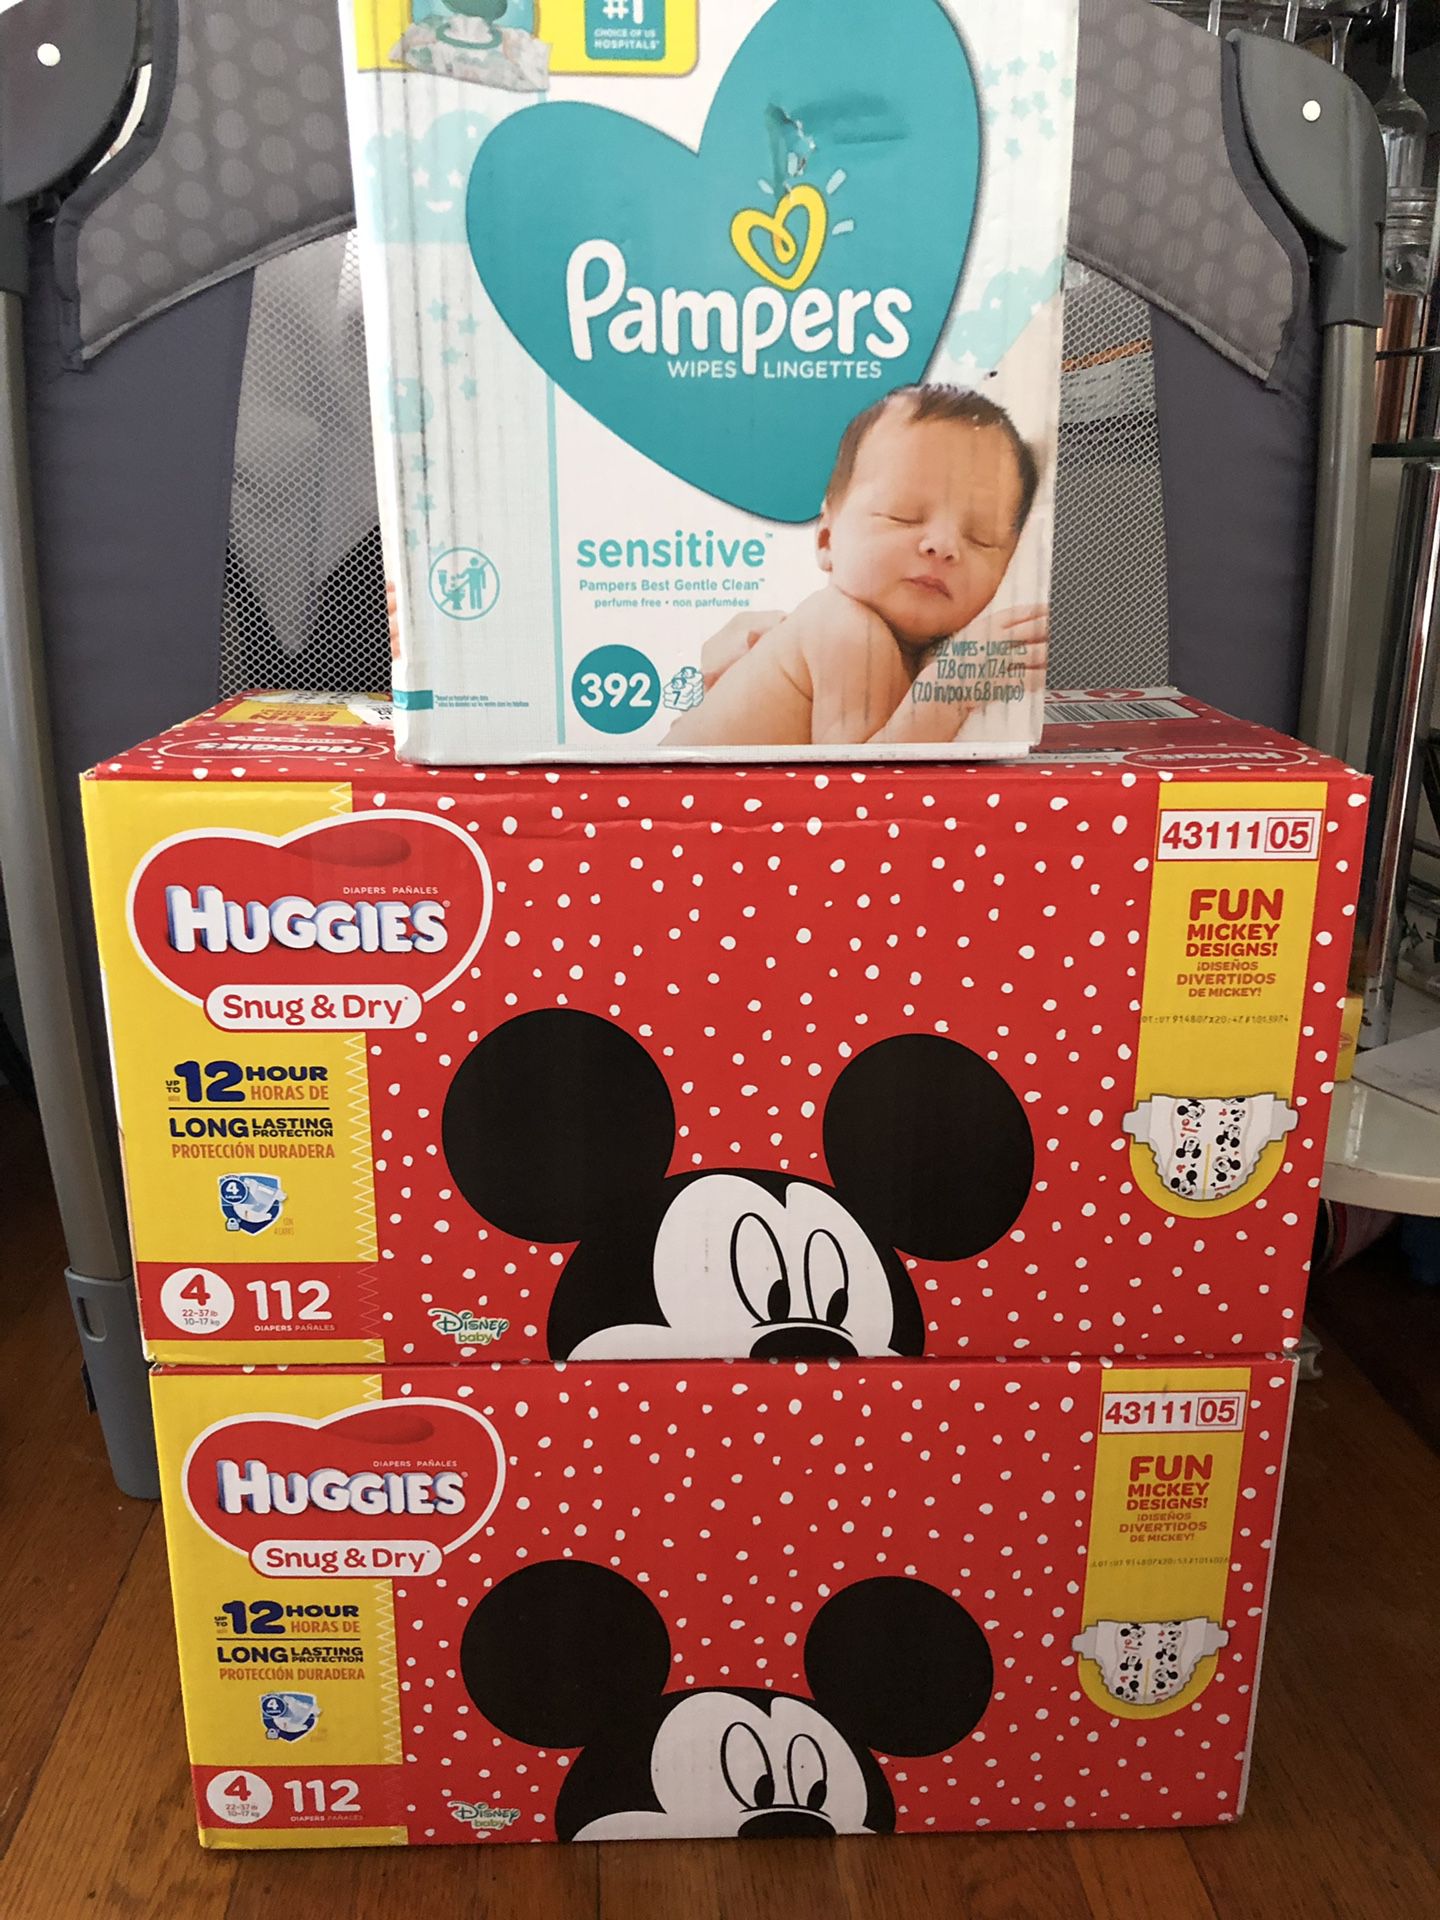 Huggies diapers size 4 plus pampers sensitive baby wipes